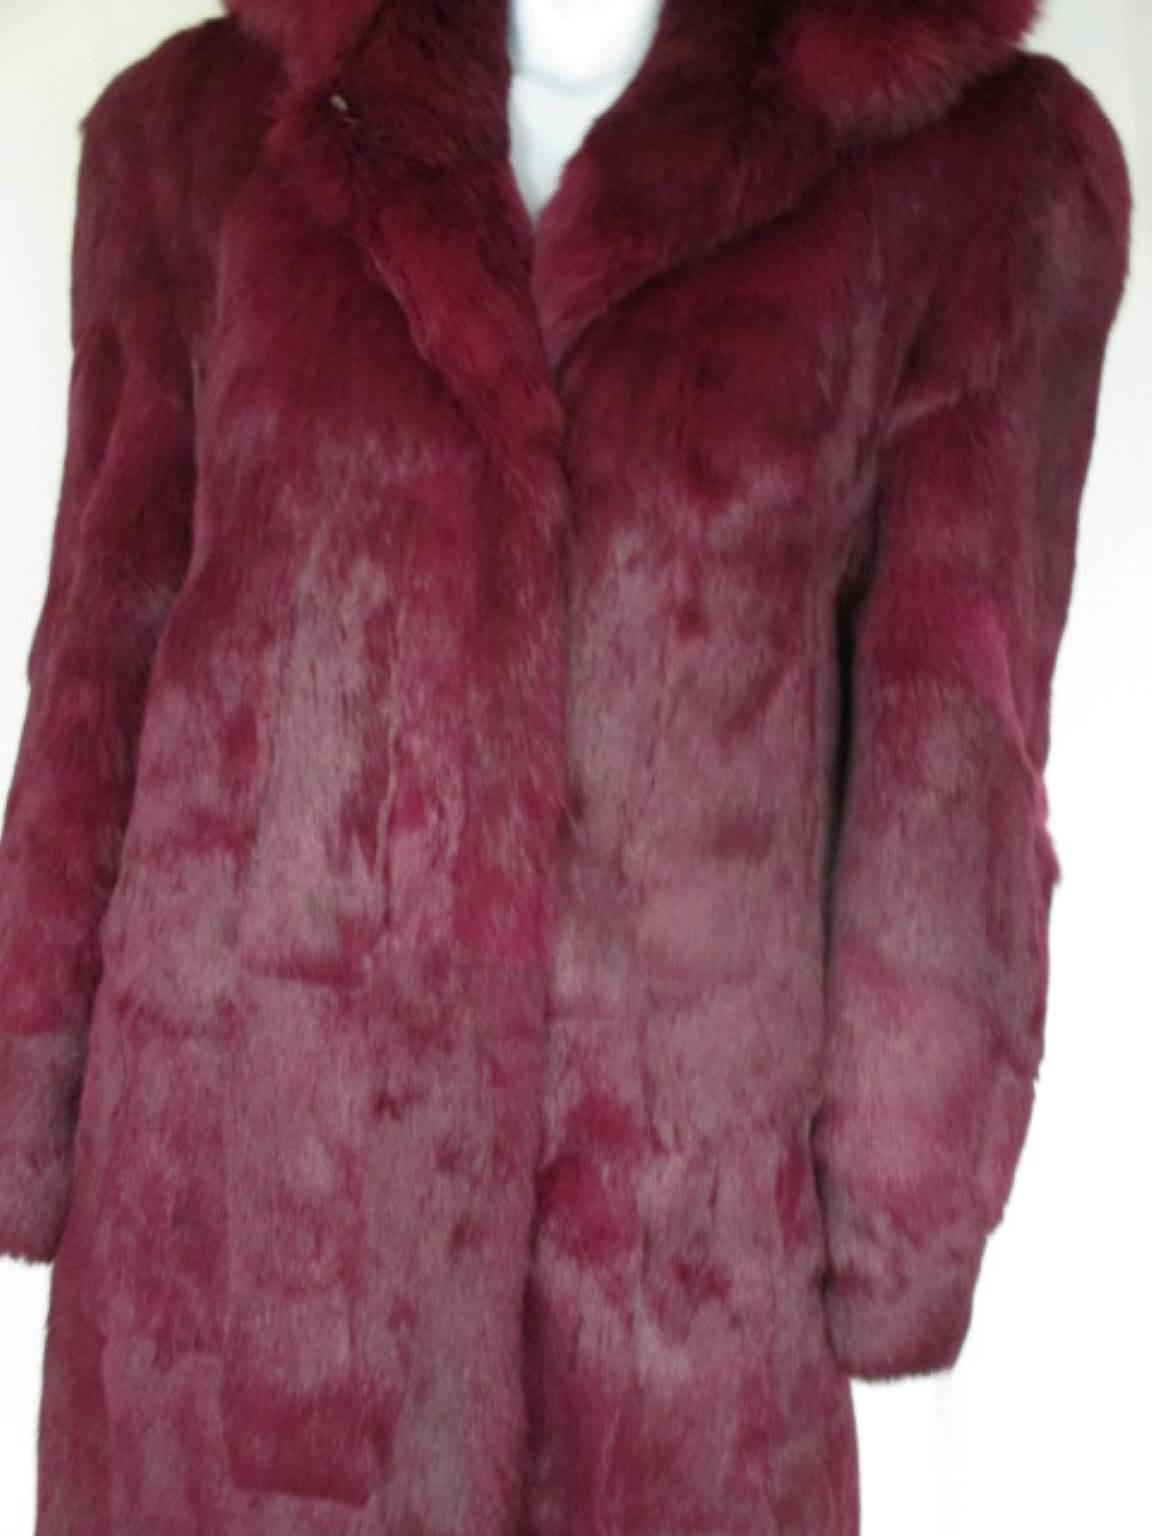 This vintage fur coat is made of dyed red fur ( lapin, rabbit).
It has 2 pockets a hood and 4 closing hooks.
Made in Czechoslovakia, famous company 